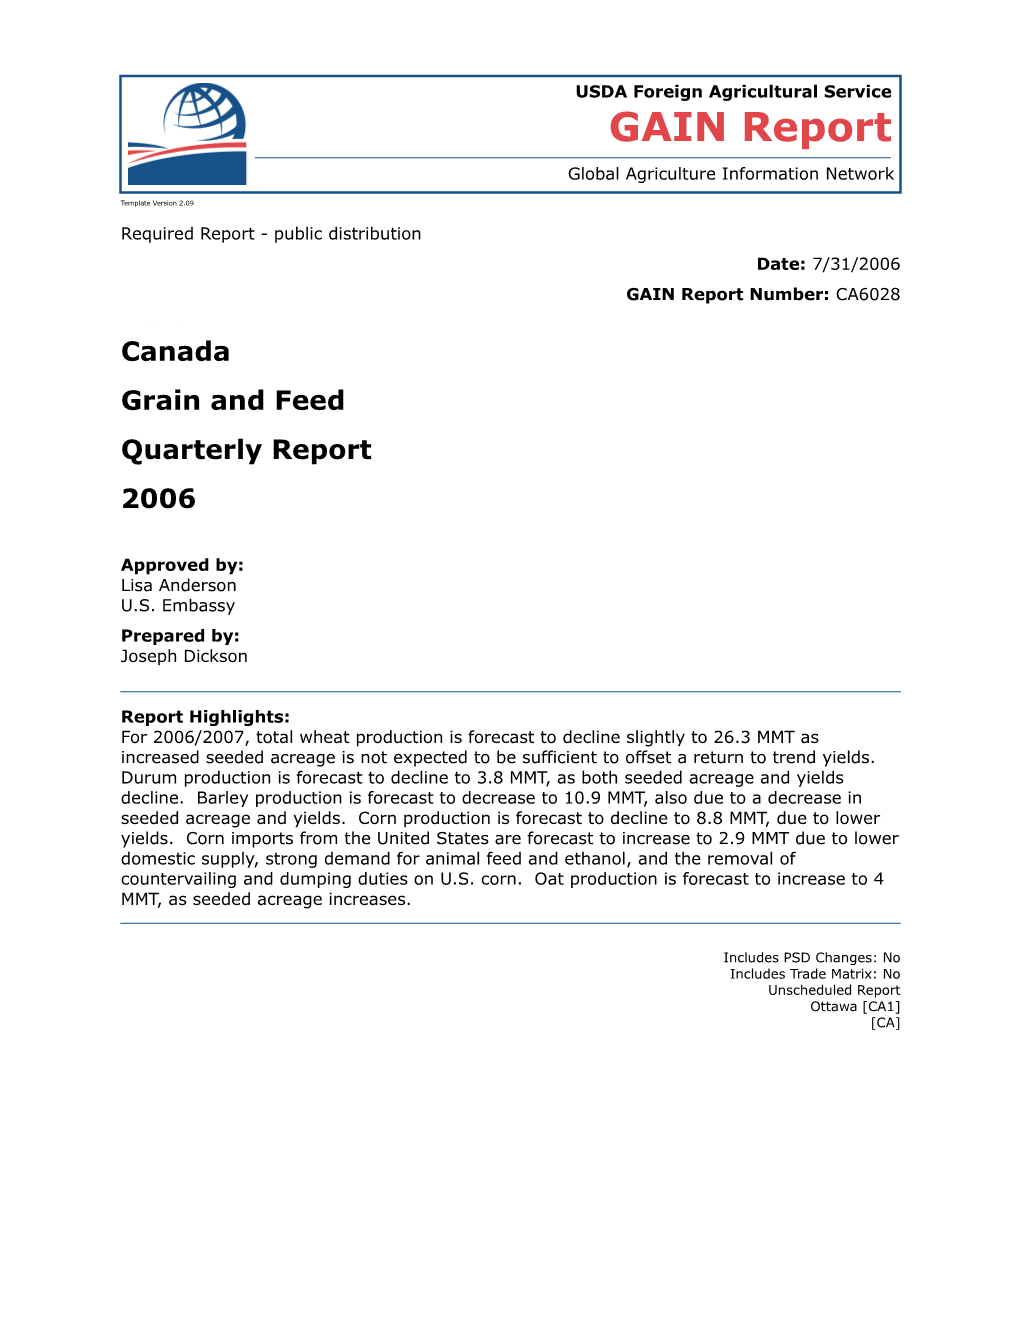 Grain and Feed Quarterly Report